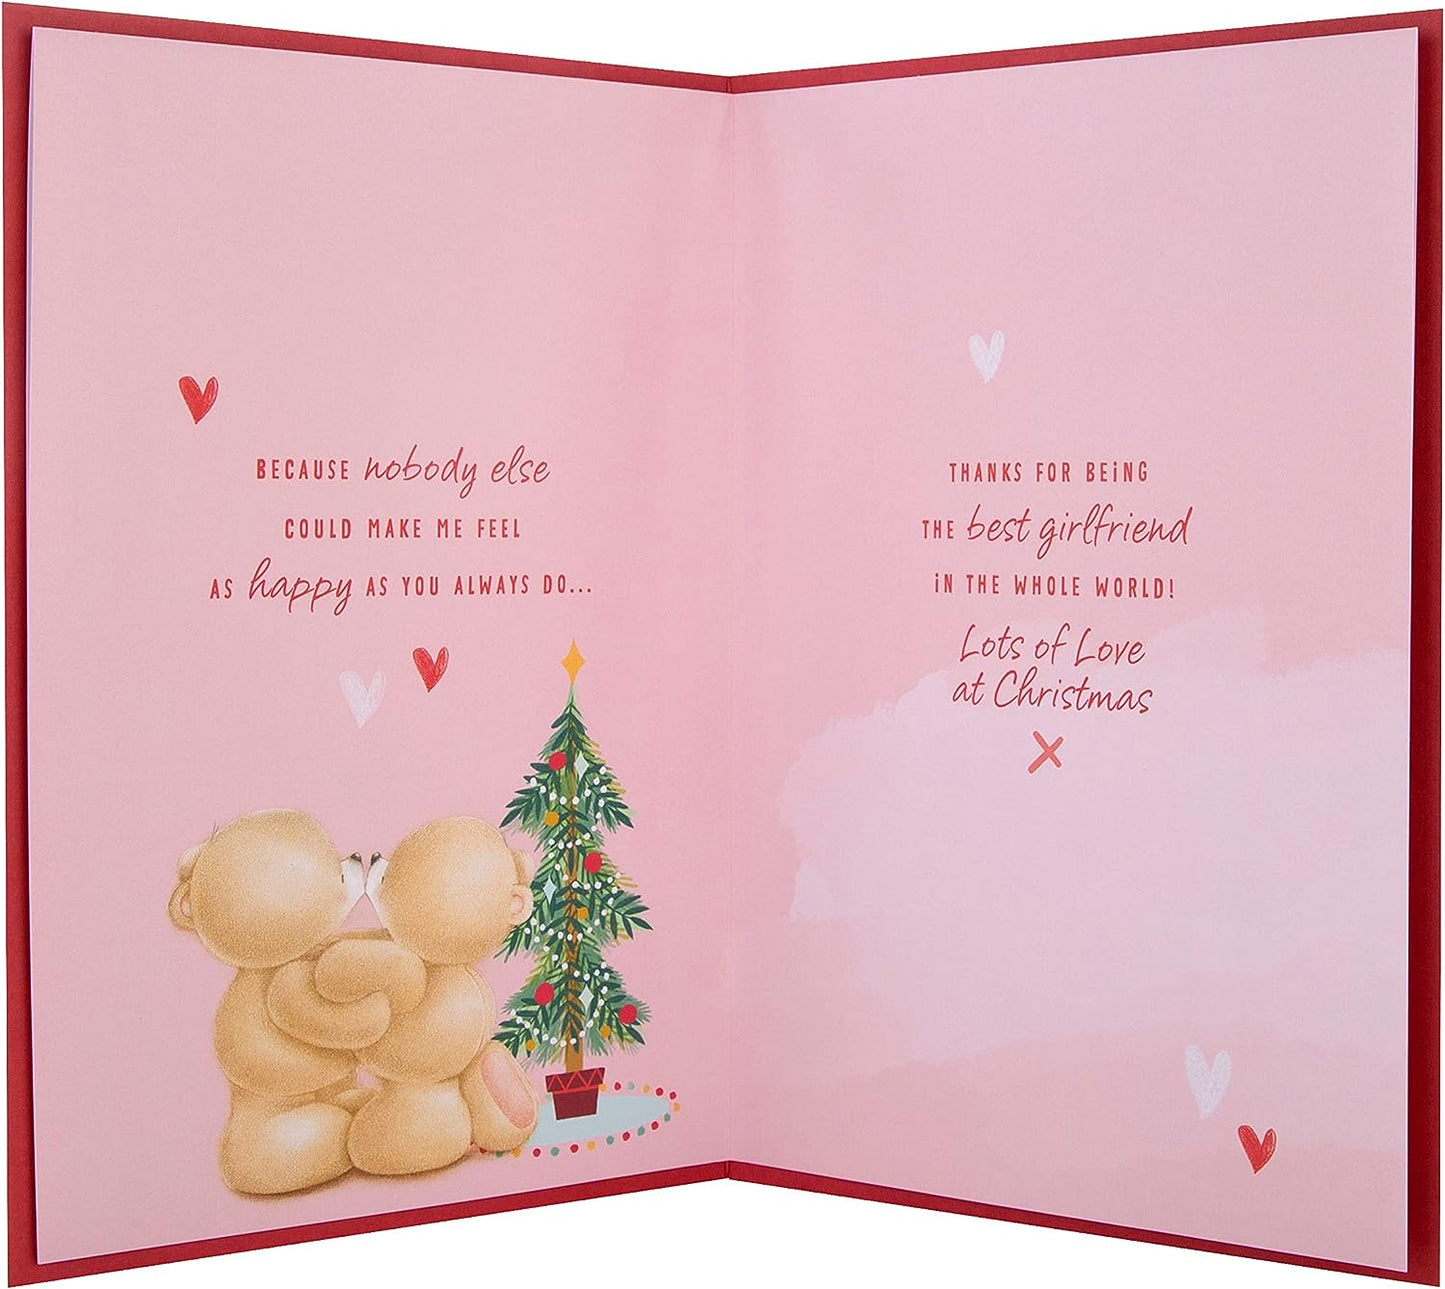 Cute Forever Friends with Hearts Design For Girlfriend Boxed Christmas Card